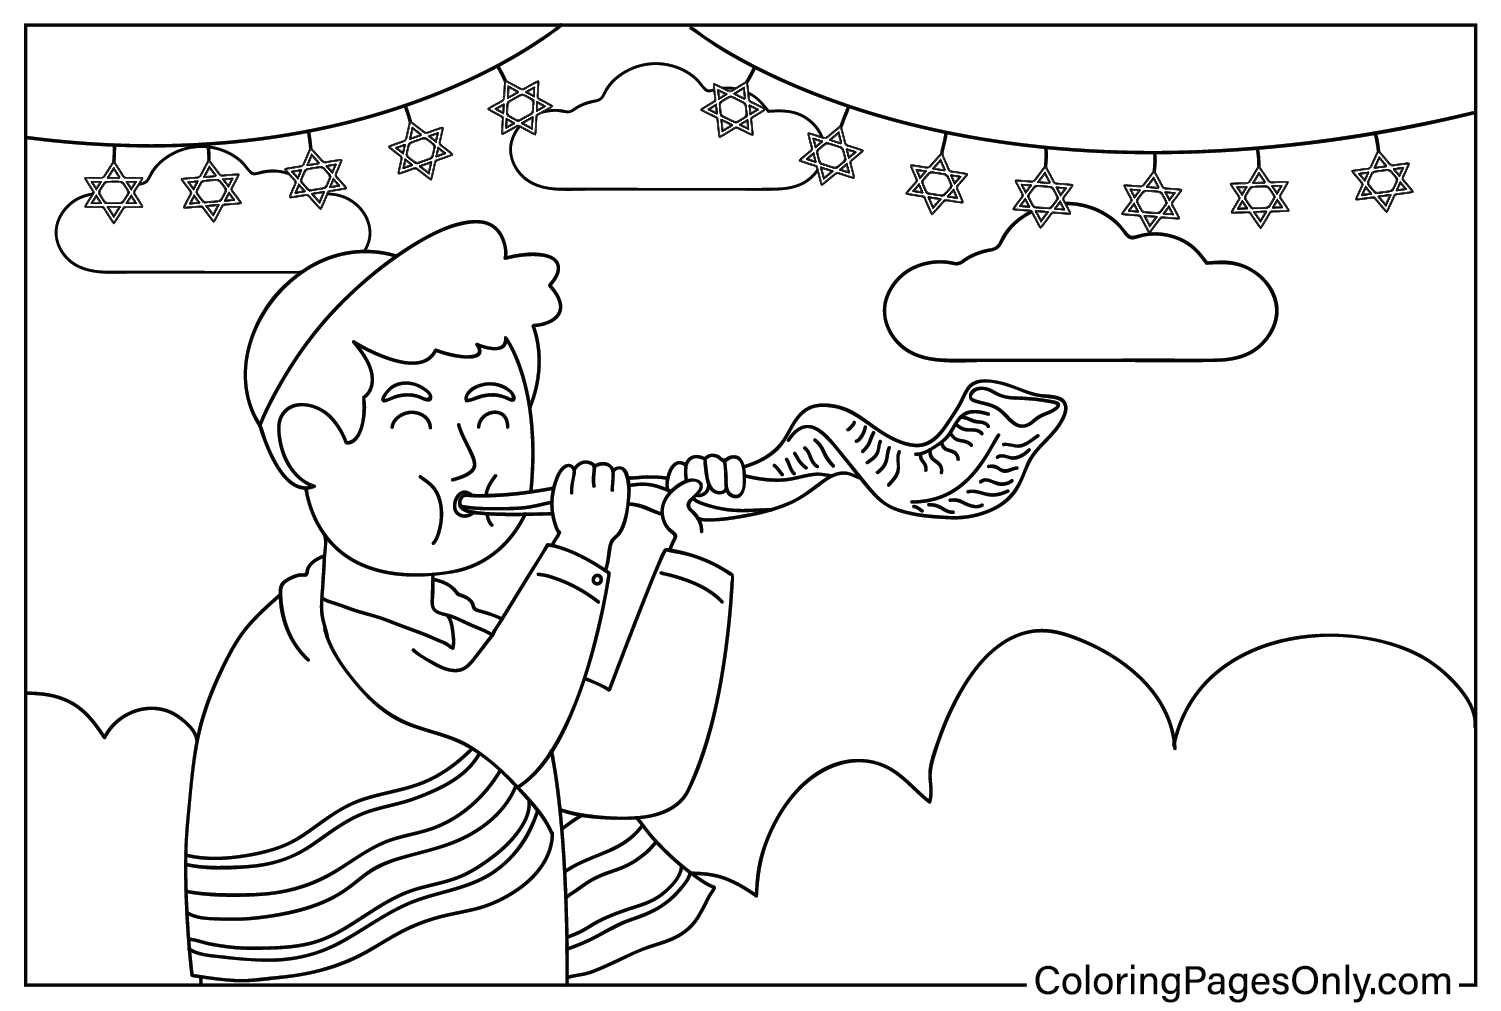 Israel Coloring Pages Free Printable from Israel